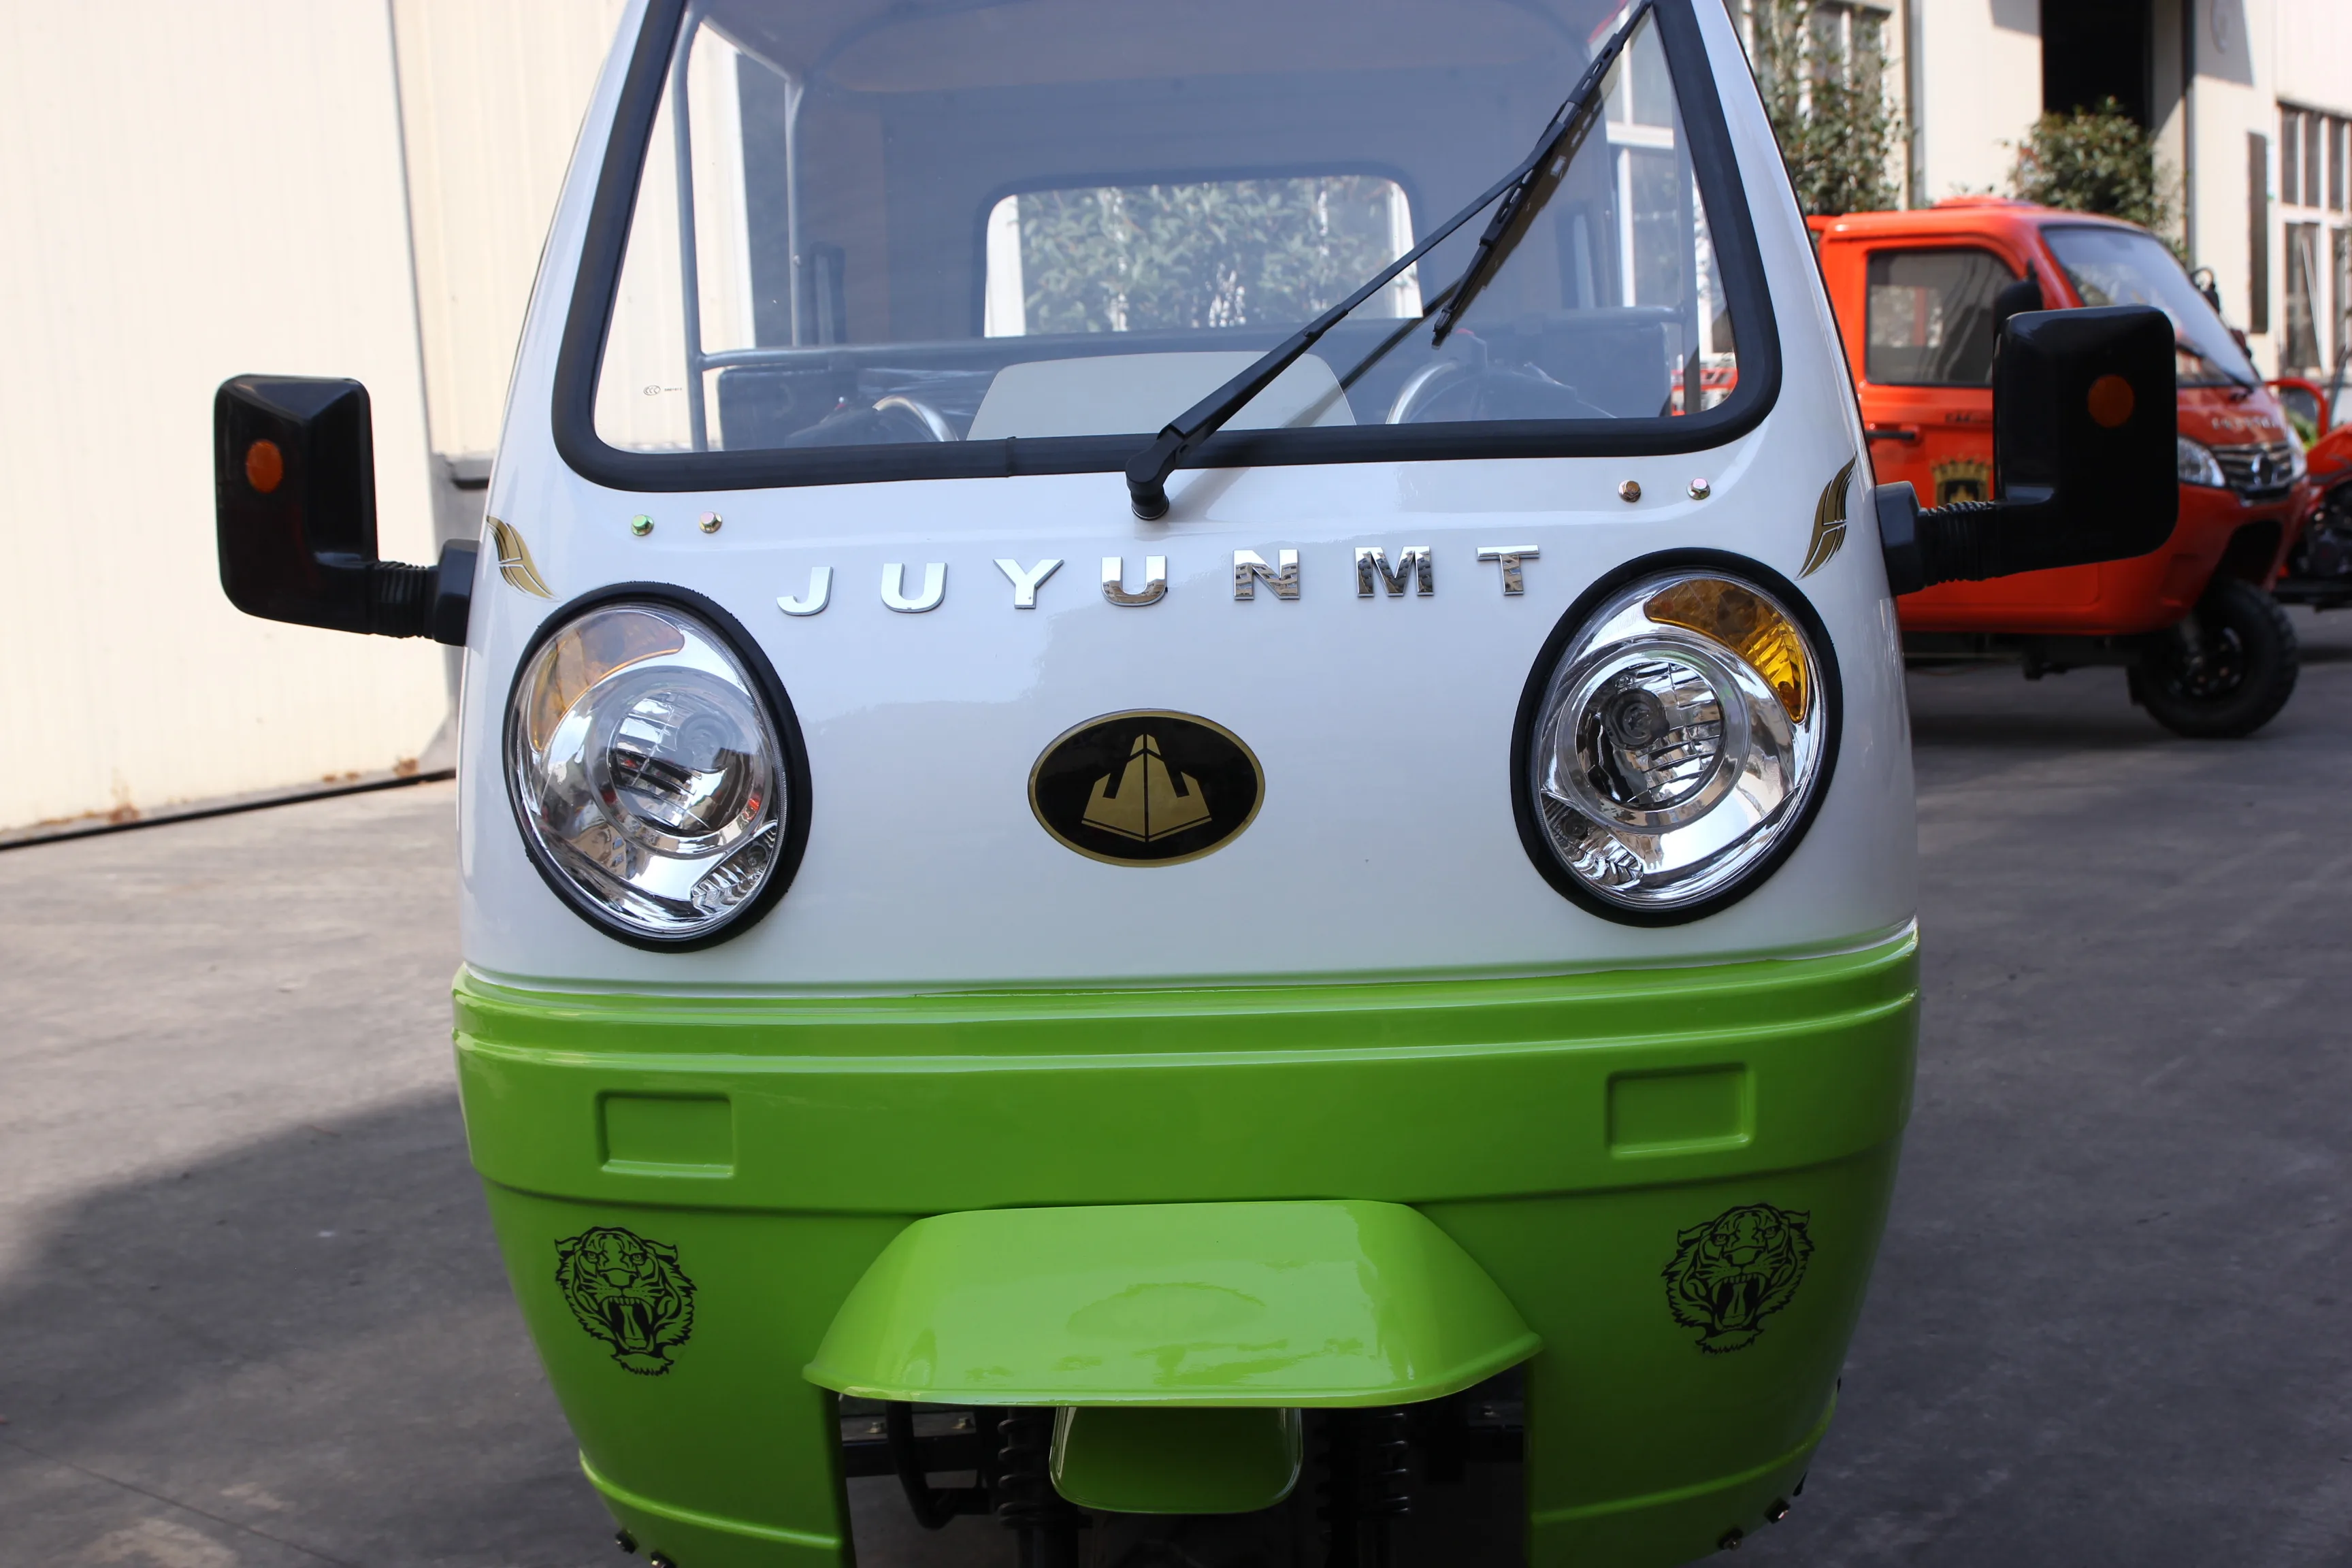 China Hot Sell Passenger Tricycles 3 Wheel Electric With Driver Cabin Tuk Tuk High Speed Taxi Trike Rickshaw Electric Tricycle